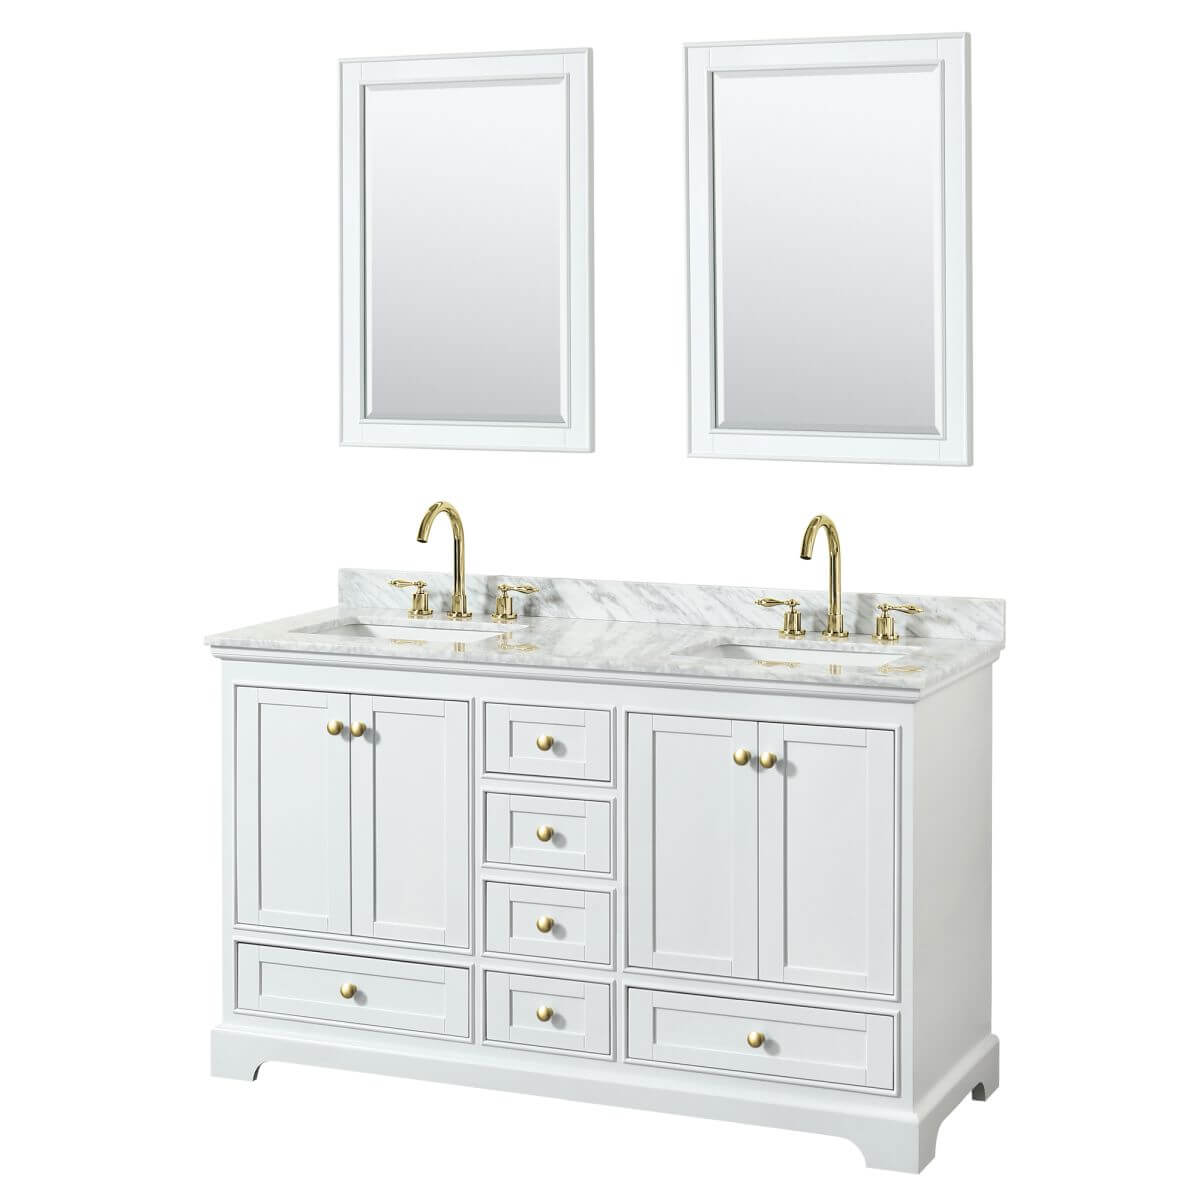 Wyndham Collection Deborah 60 inch Double Bathroom Vanity in White with White Carrara Marble Countertop, Undermount Square Sinks, Brushed Gold Trim and 24 inch Mirrors - WCS202060DWGCMUNSM24